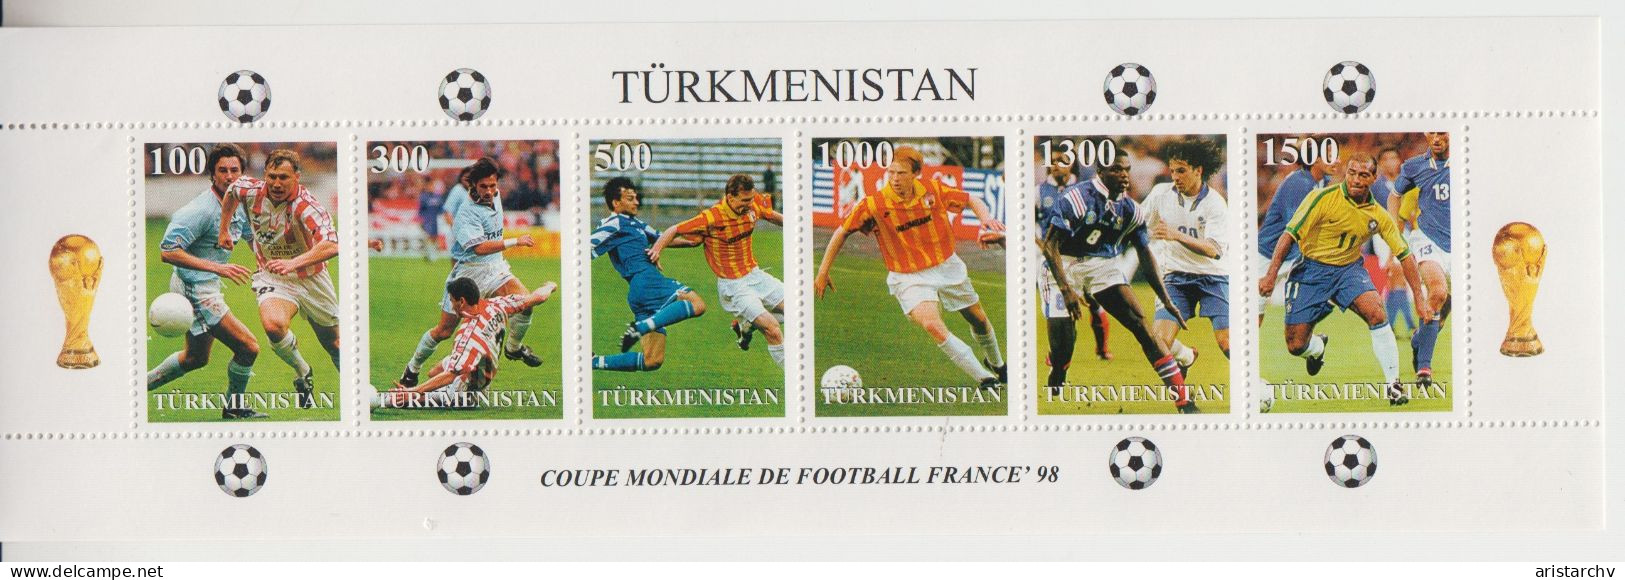 TURKMENISTAN 1998 FOOTBALL WORLD CUP 2 S/SHEETS AND 6 STAMPS - 1998 – Frankreich